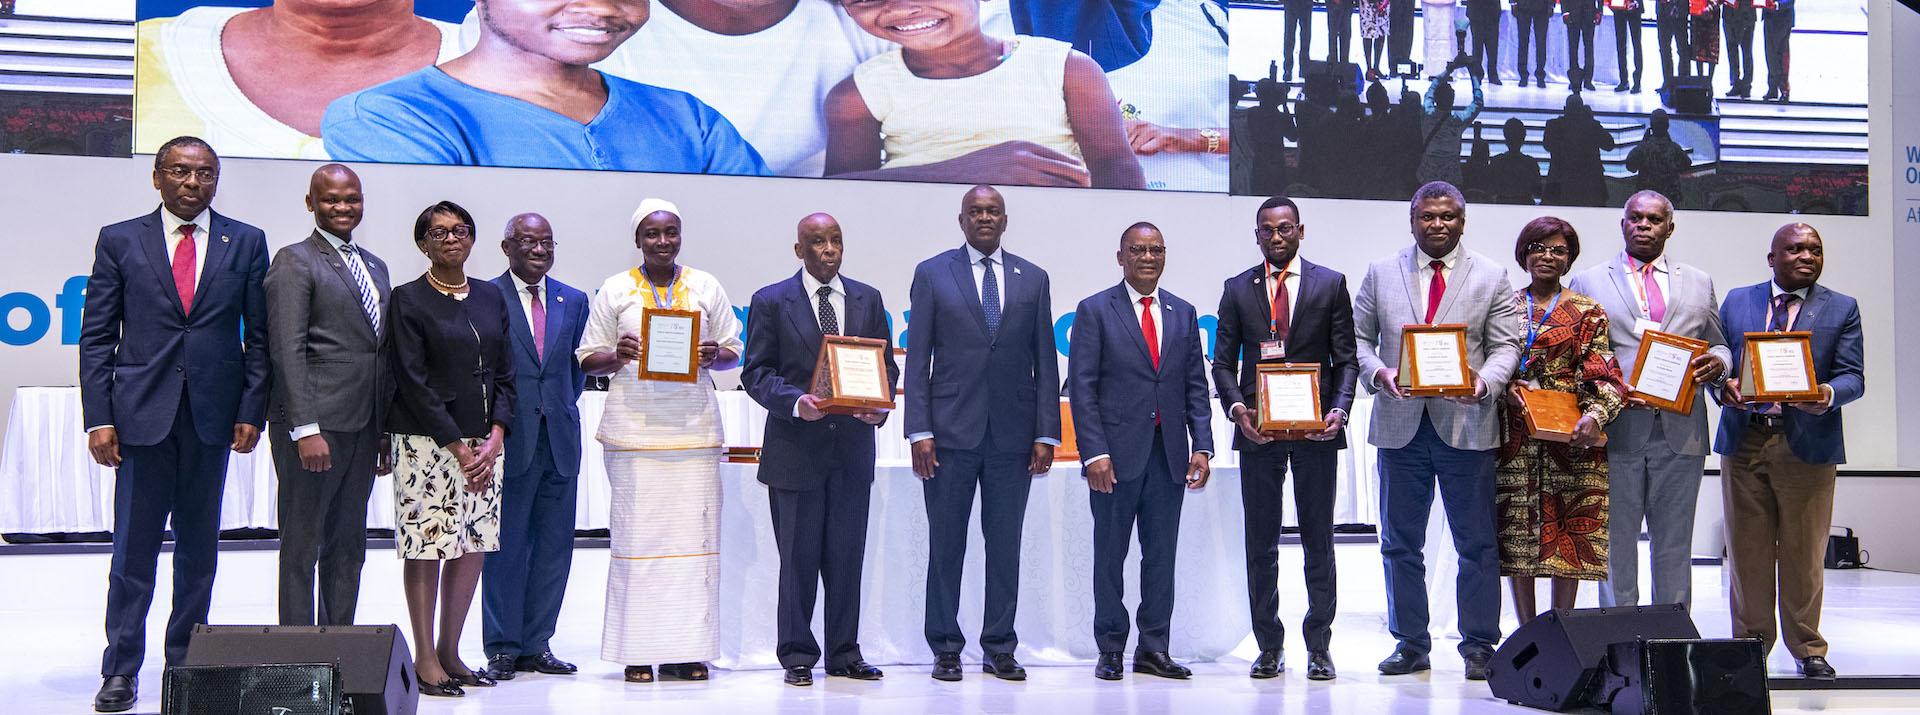 At its 75th anniversary, WHO honours former leaders for their contributions to public health